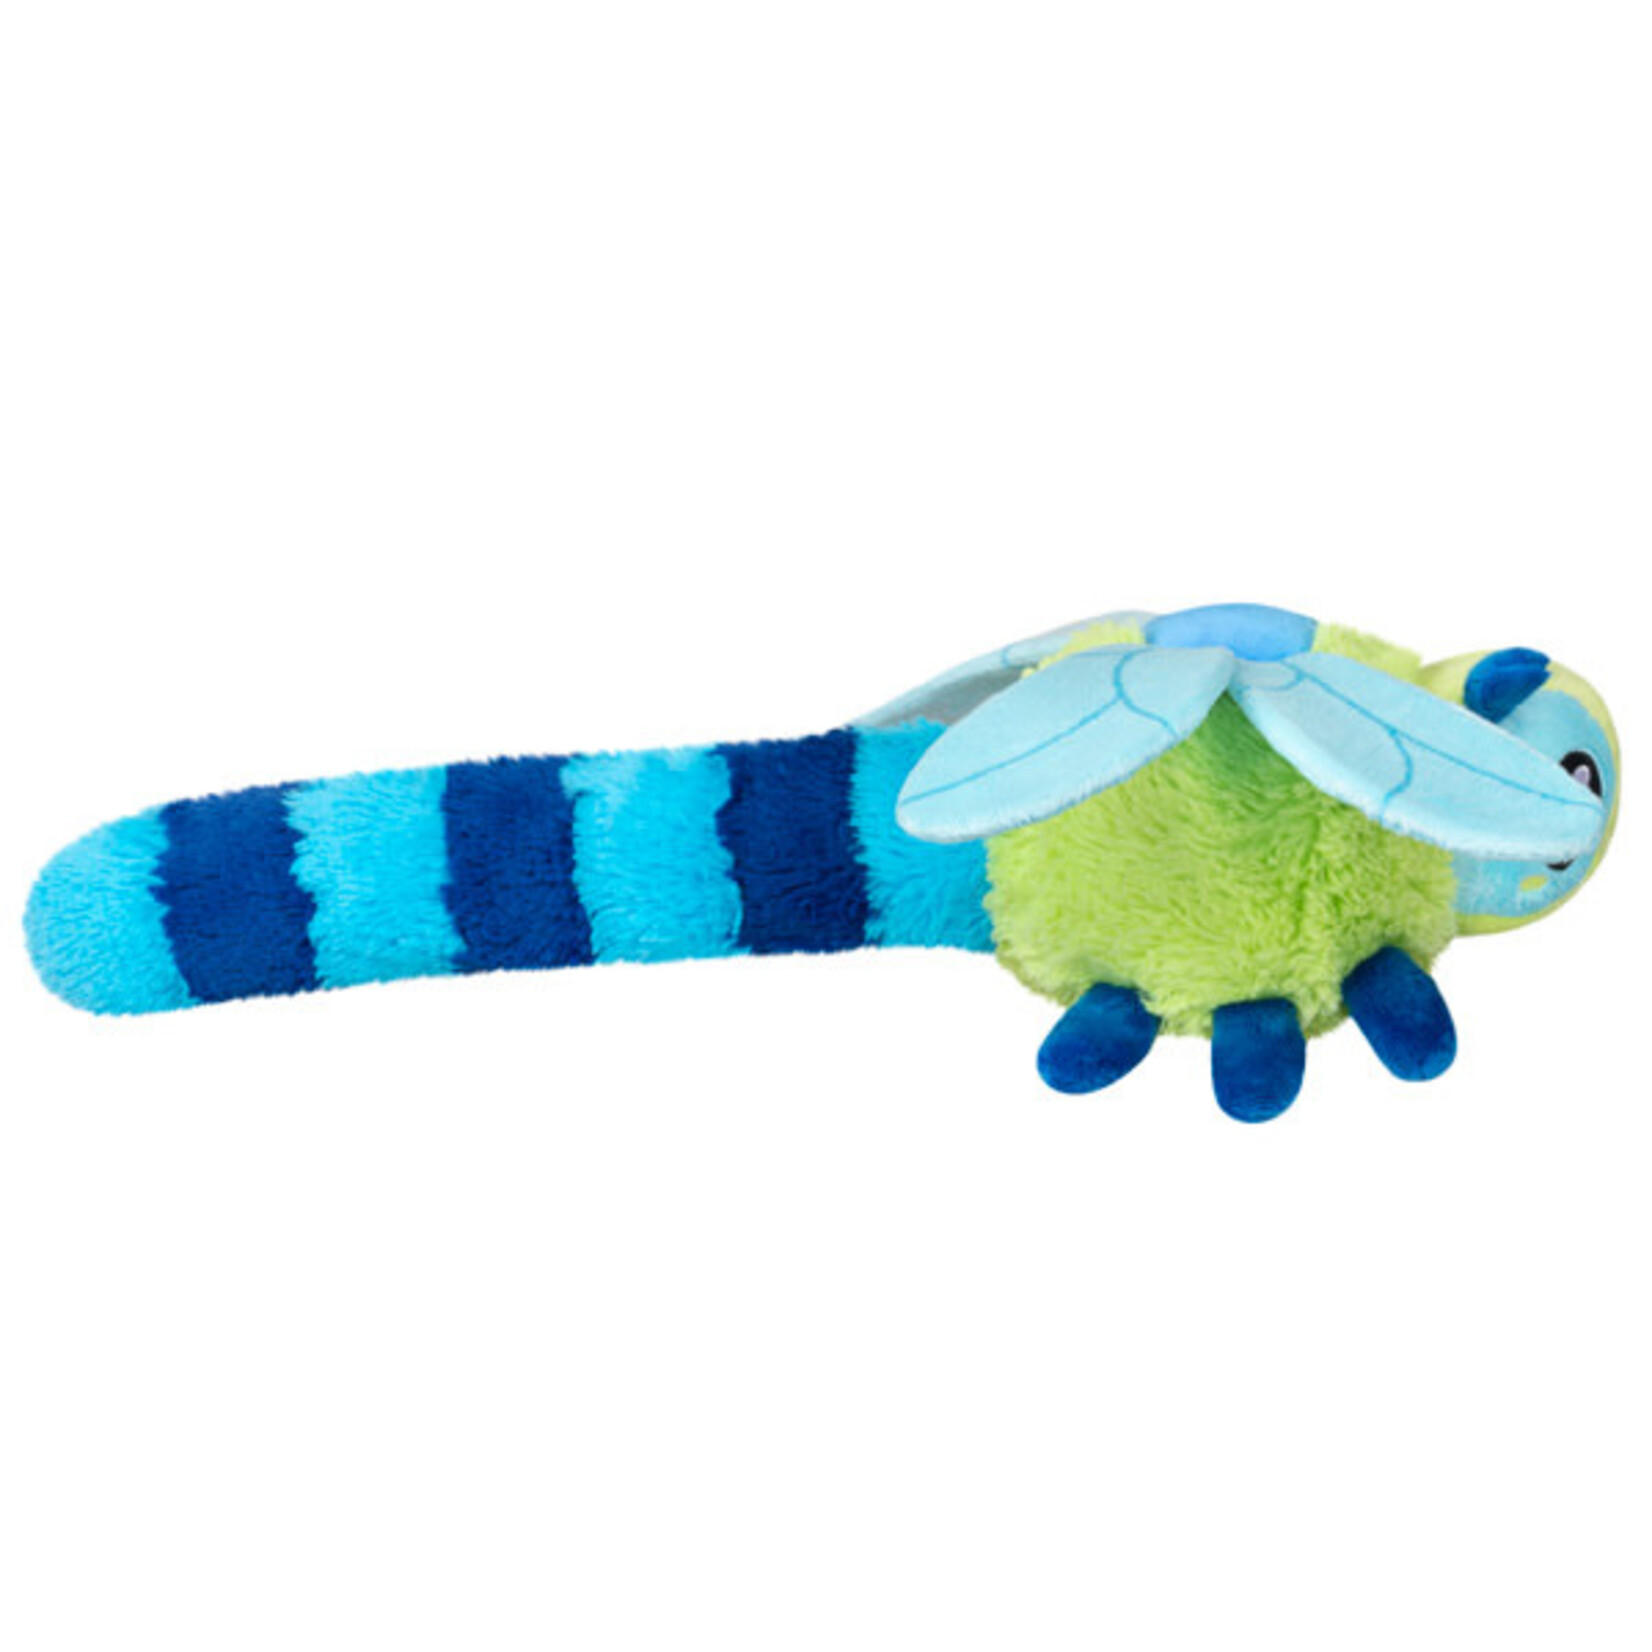 Squishable Dragonfly Squishable